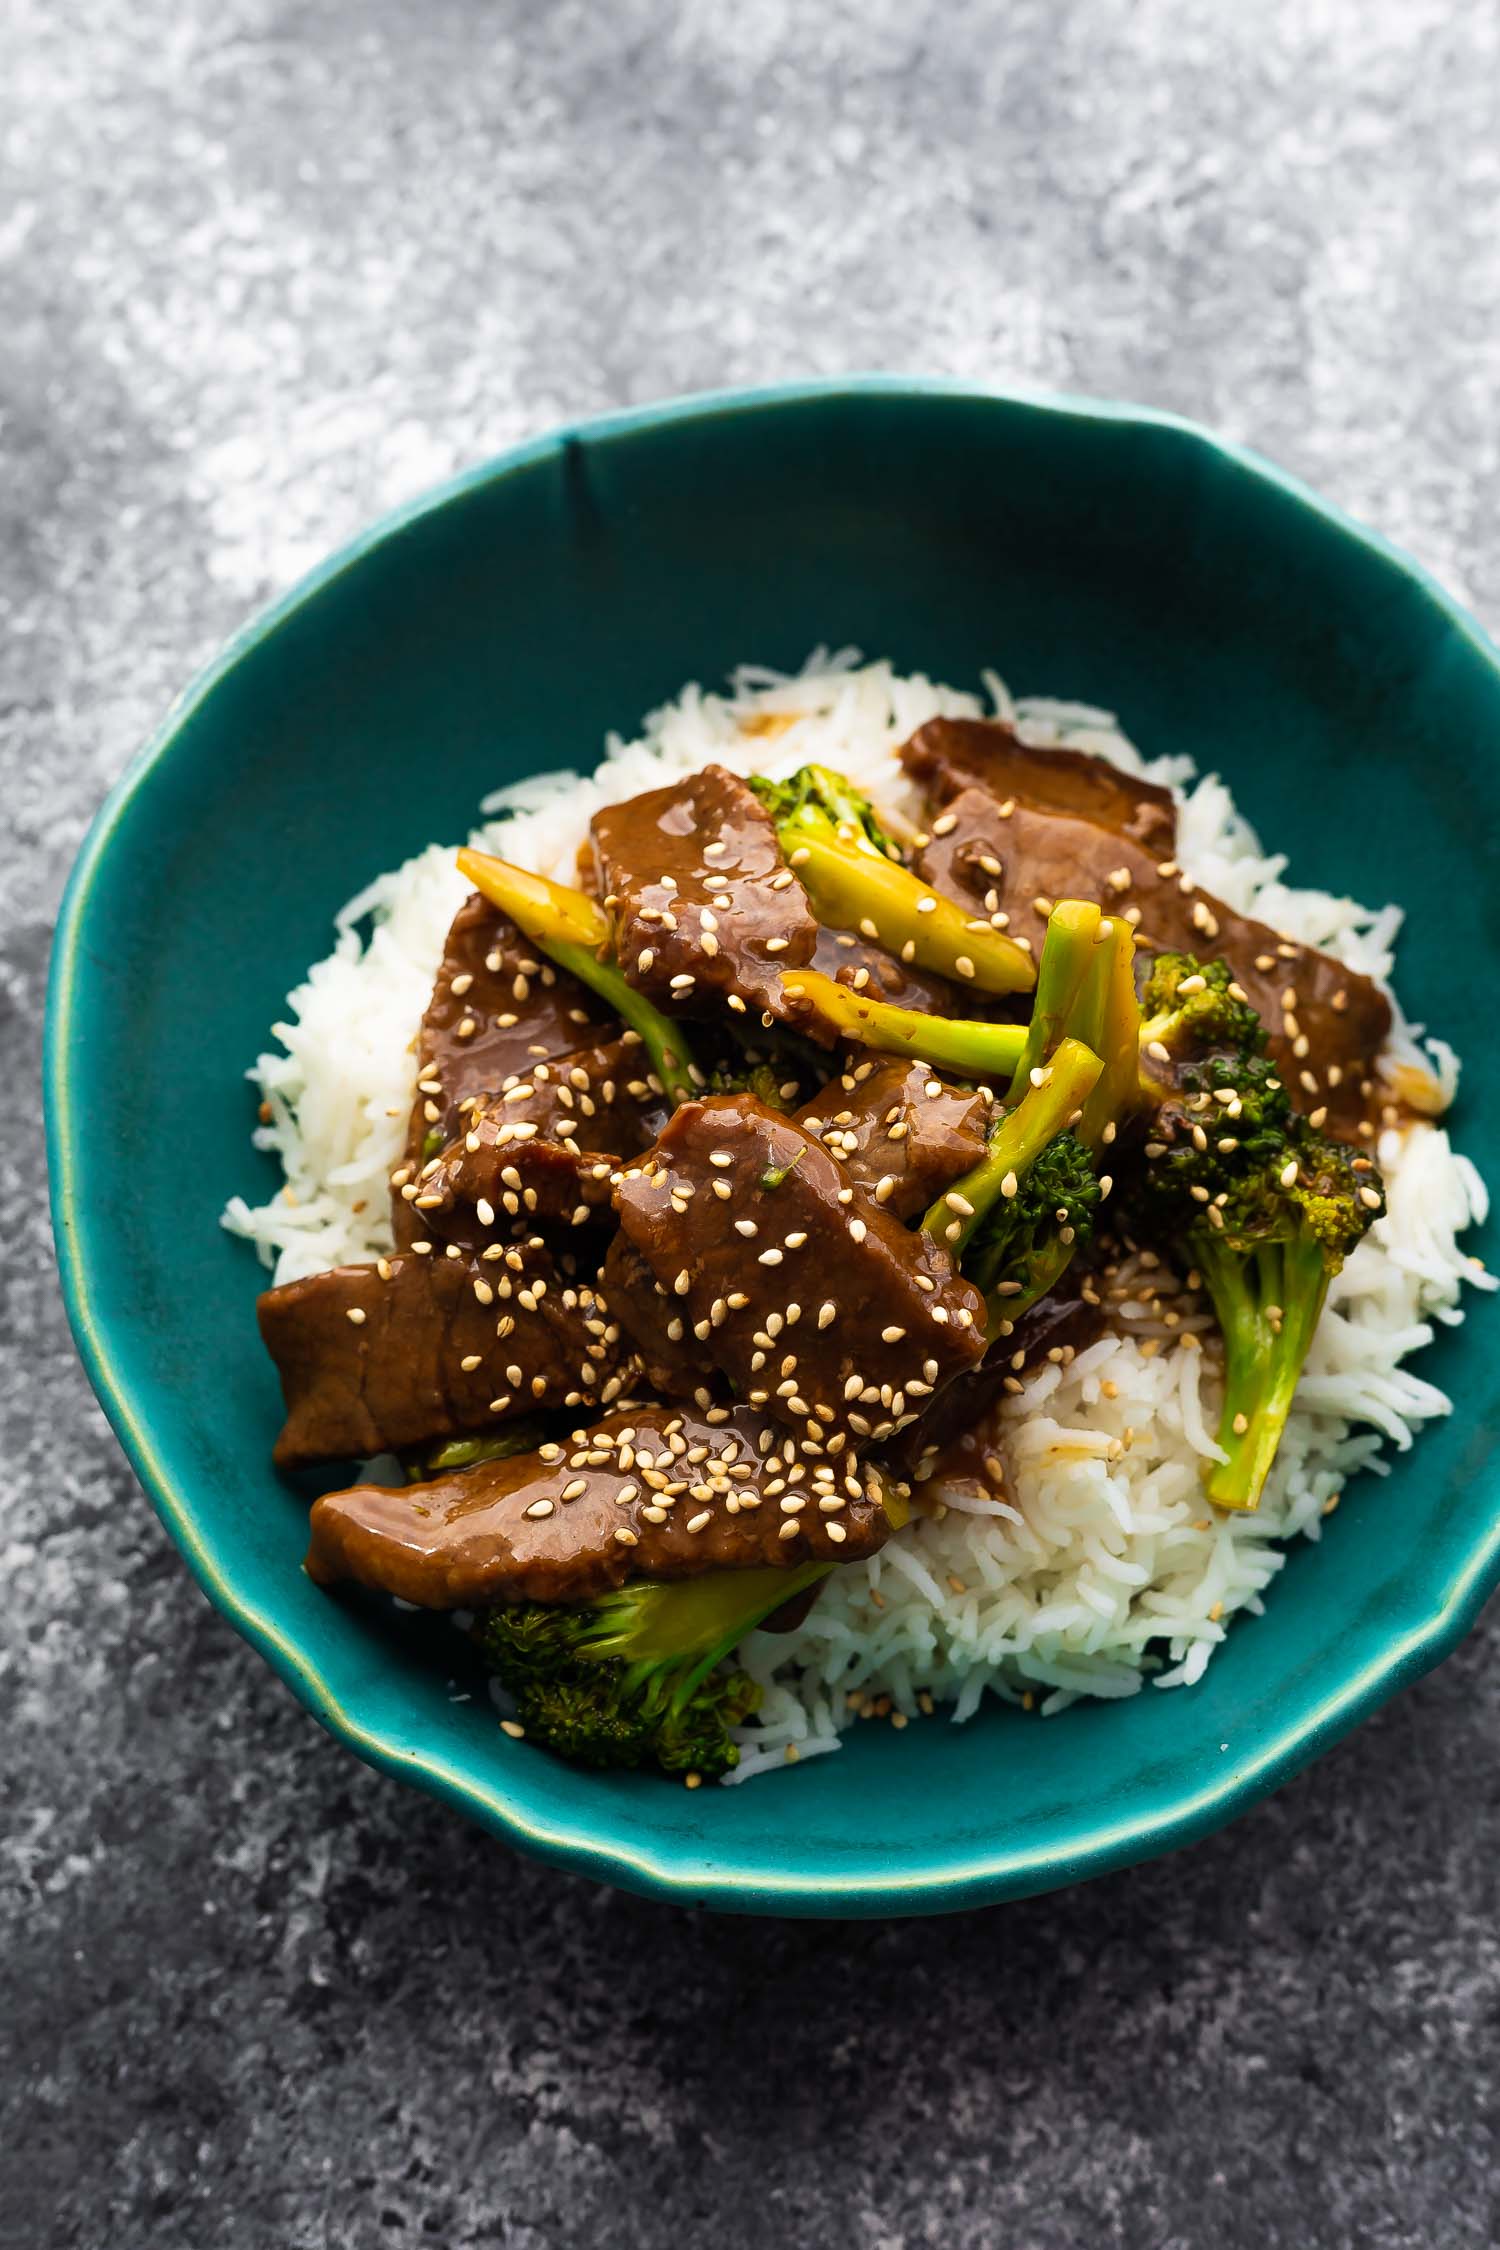 beef and broccoli served over rice in blue bowl